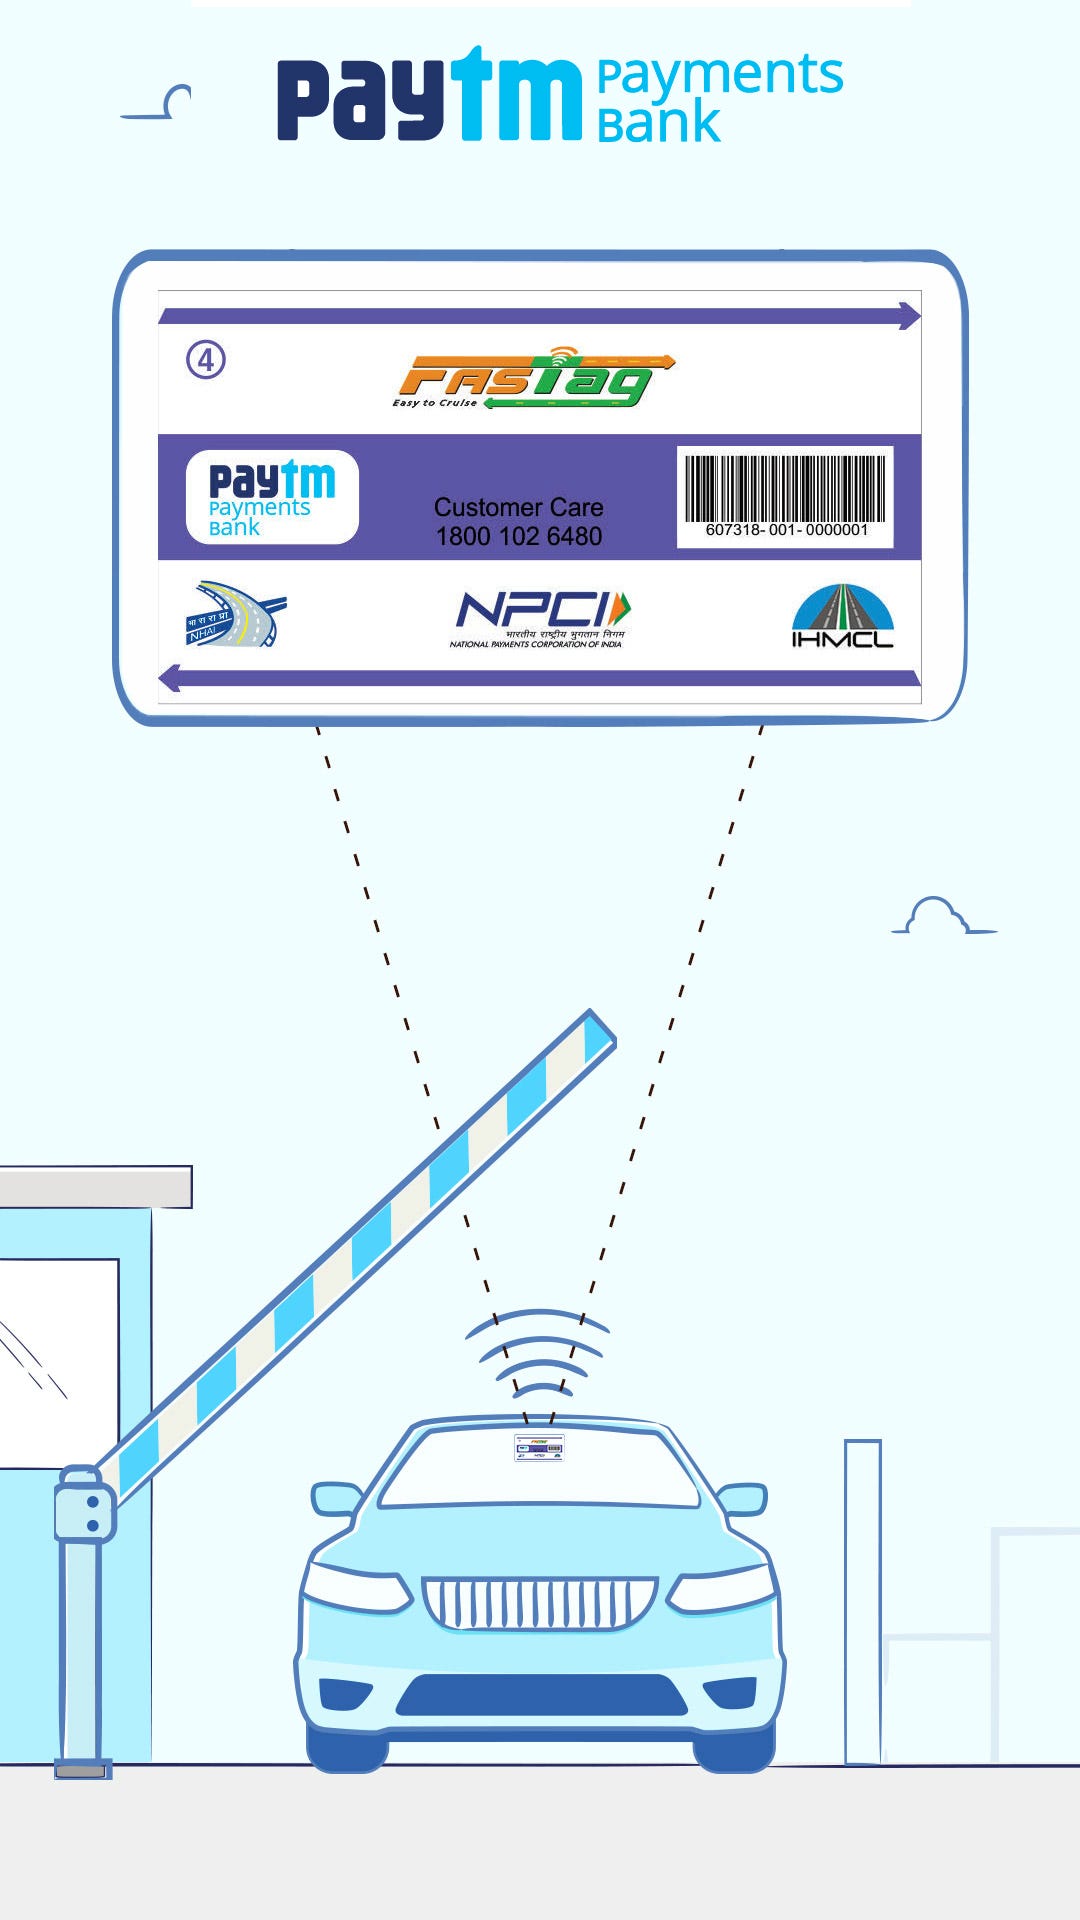 Paytm FASTag launched! - Paytm Blog